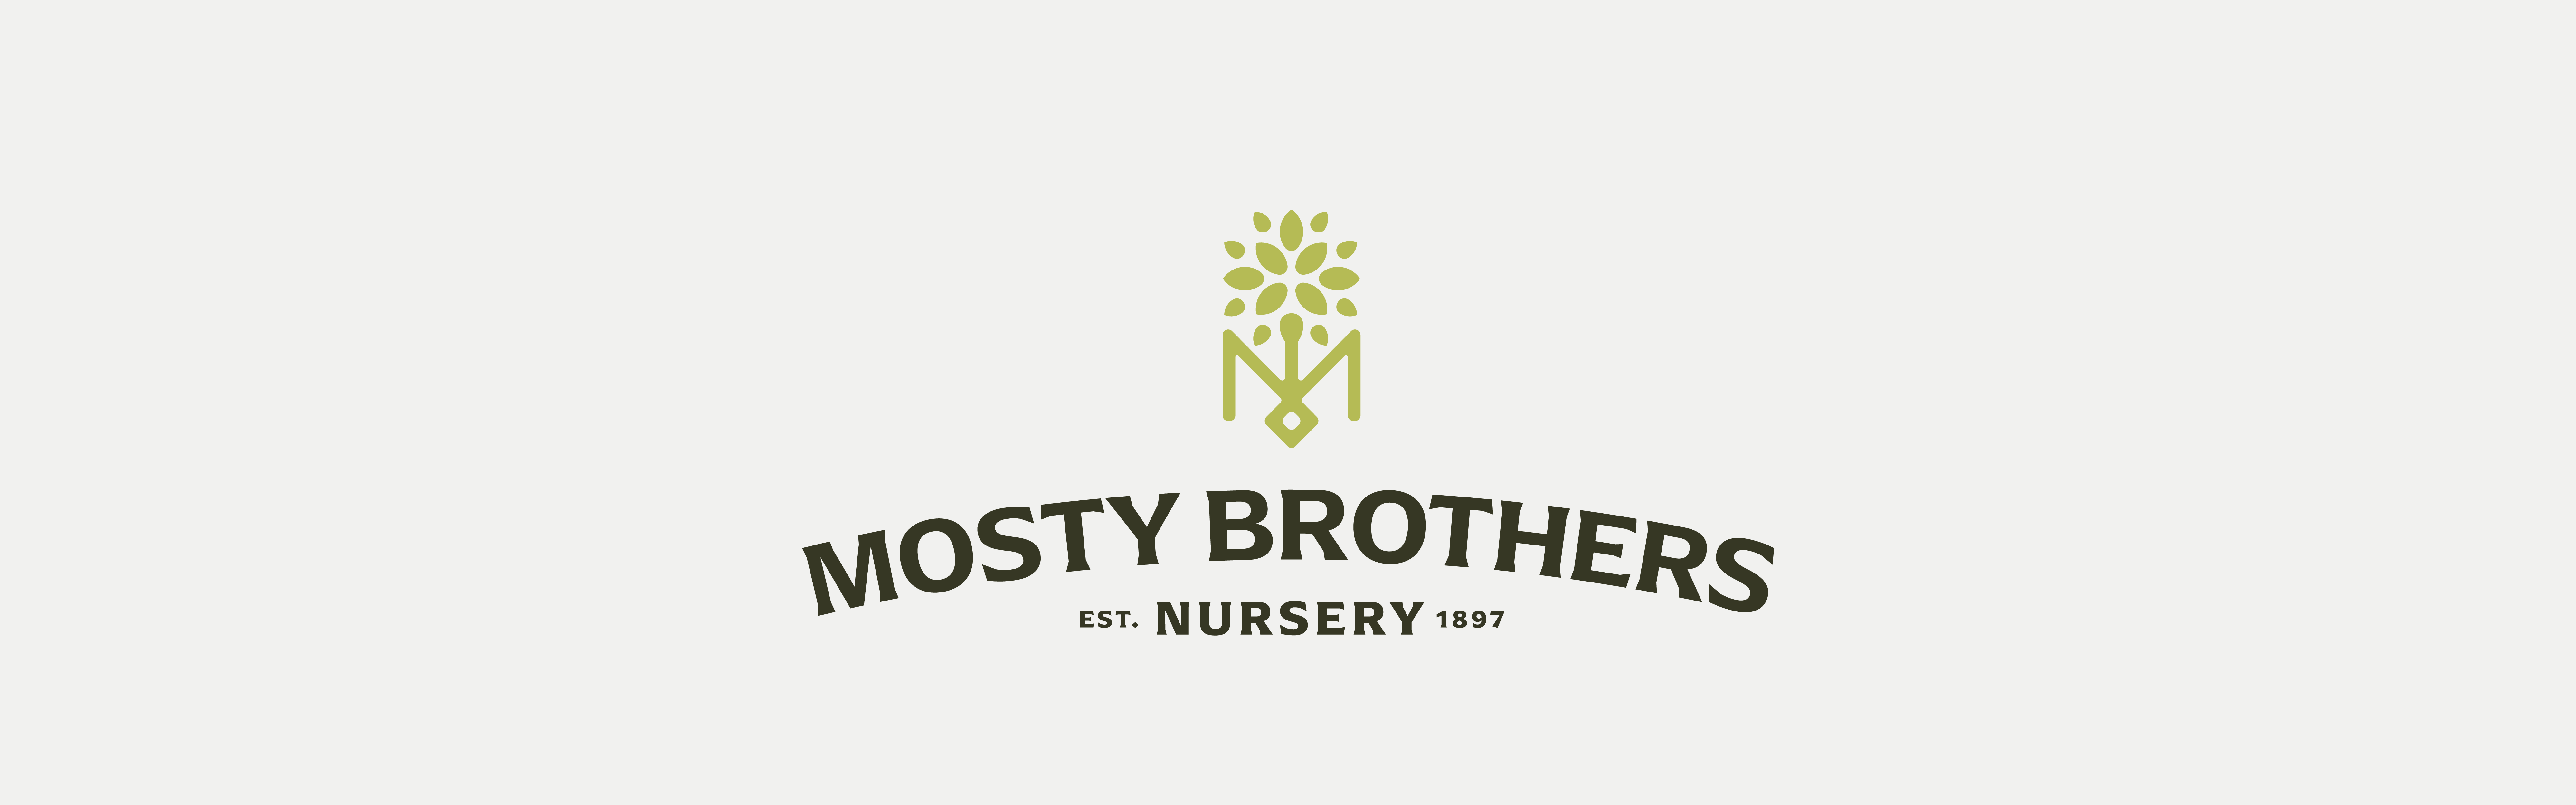 A logo featuring the text "Mosty Brothers Nursery est. 1897" with a graphic of stylized plants above the text.